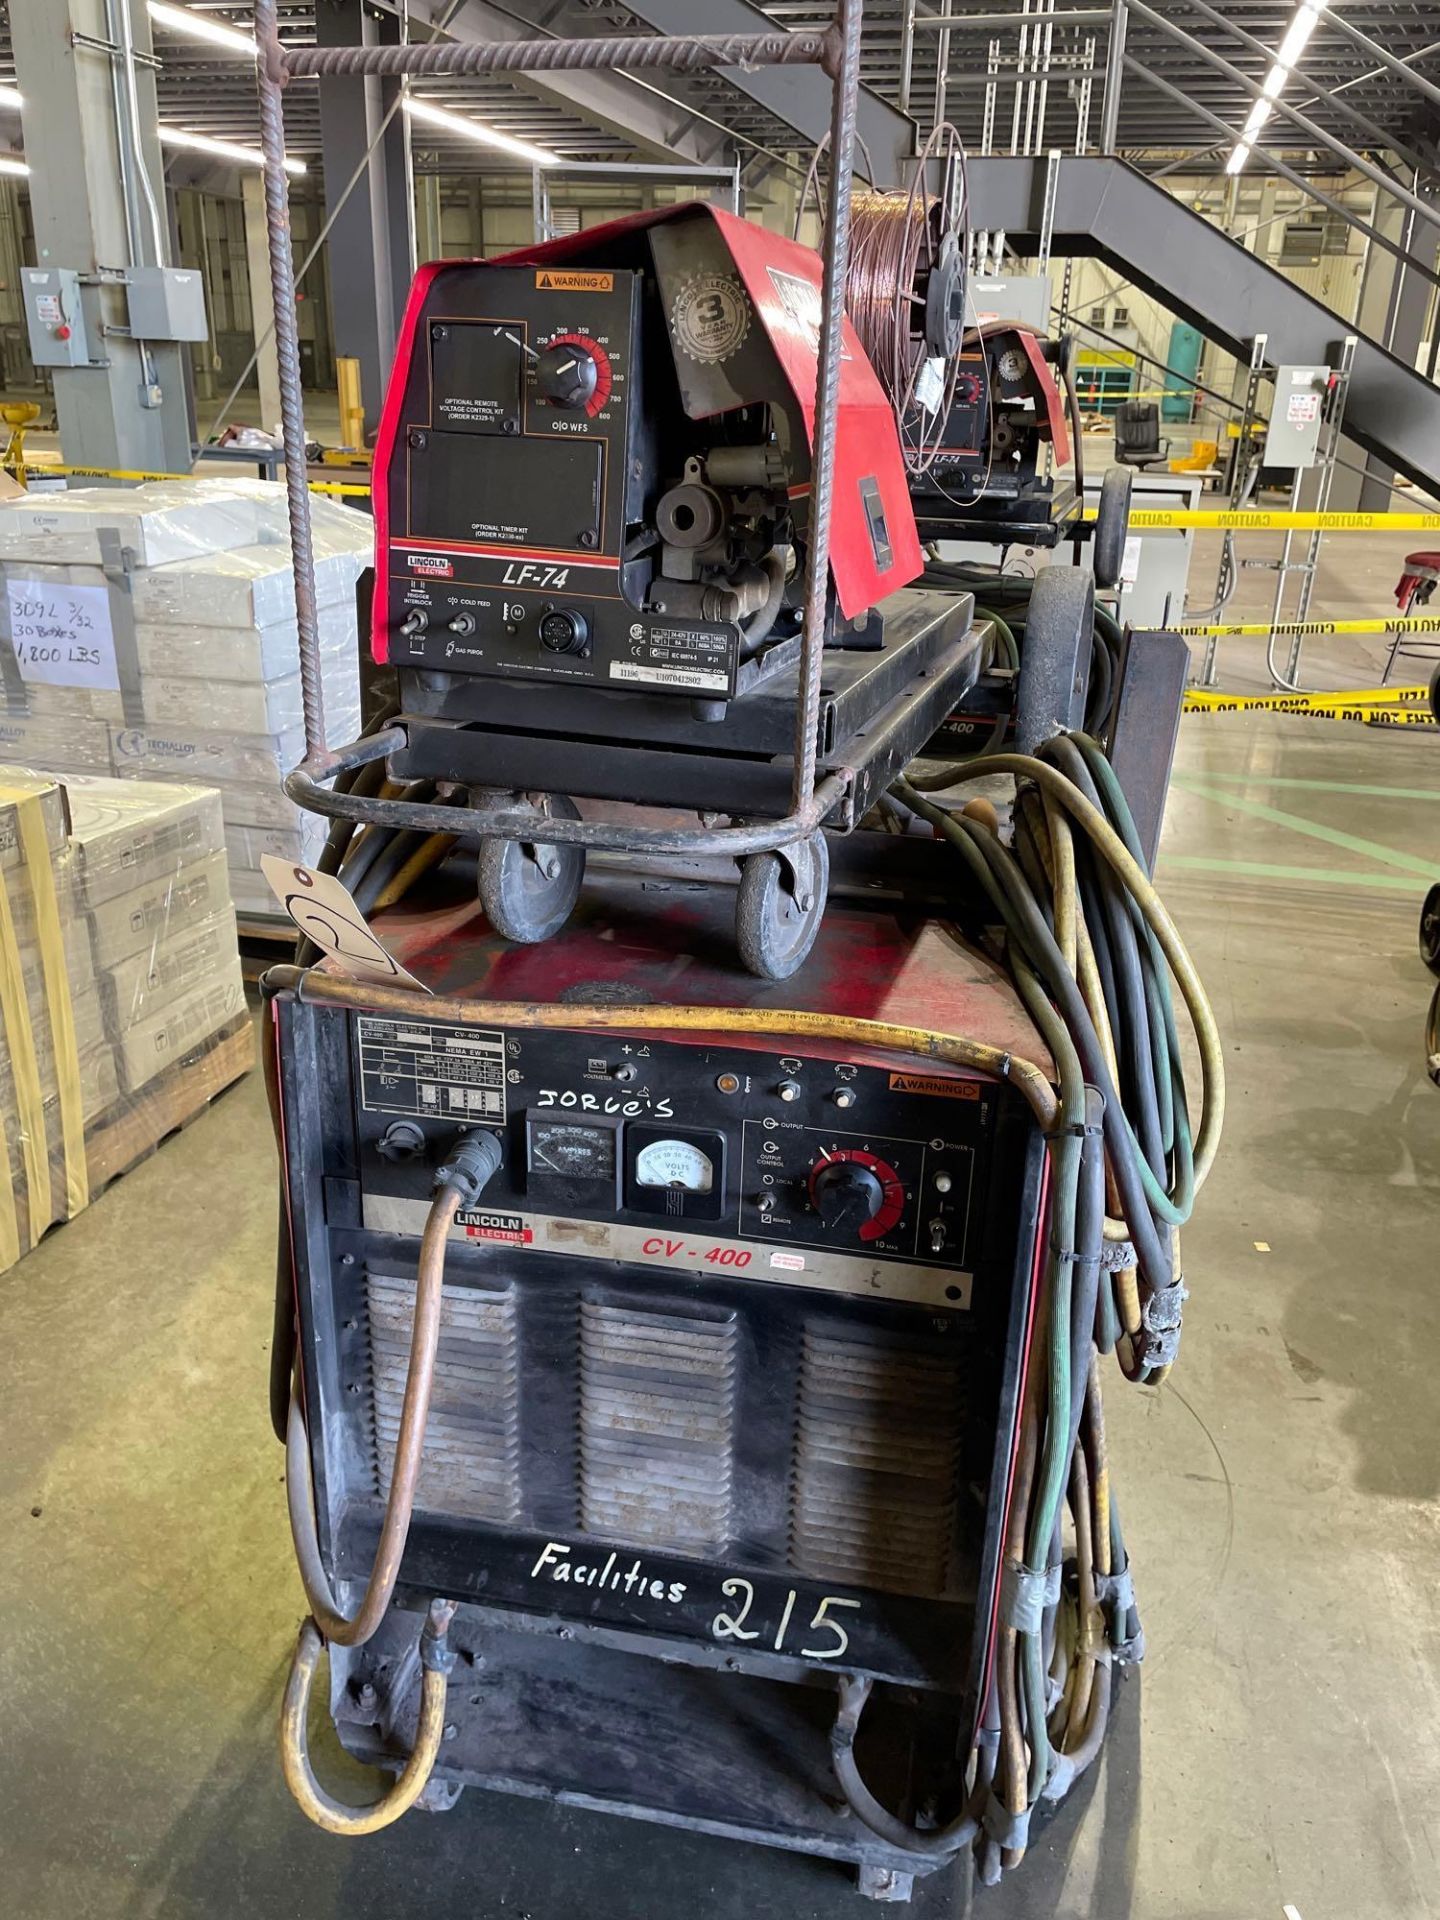 Lincoln Electric CV-400 Welder Power Source with Lincoln Electric LF-74 Wire Feeder